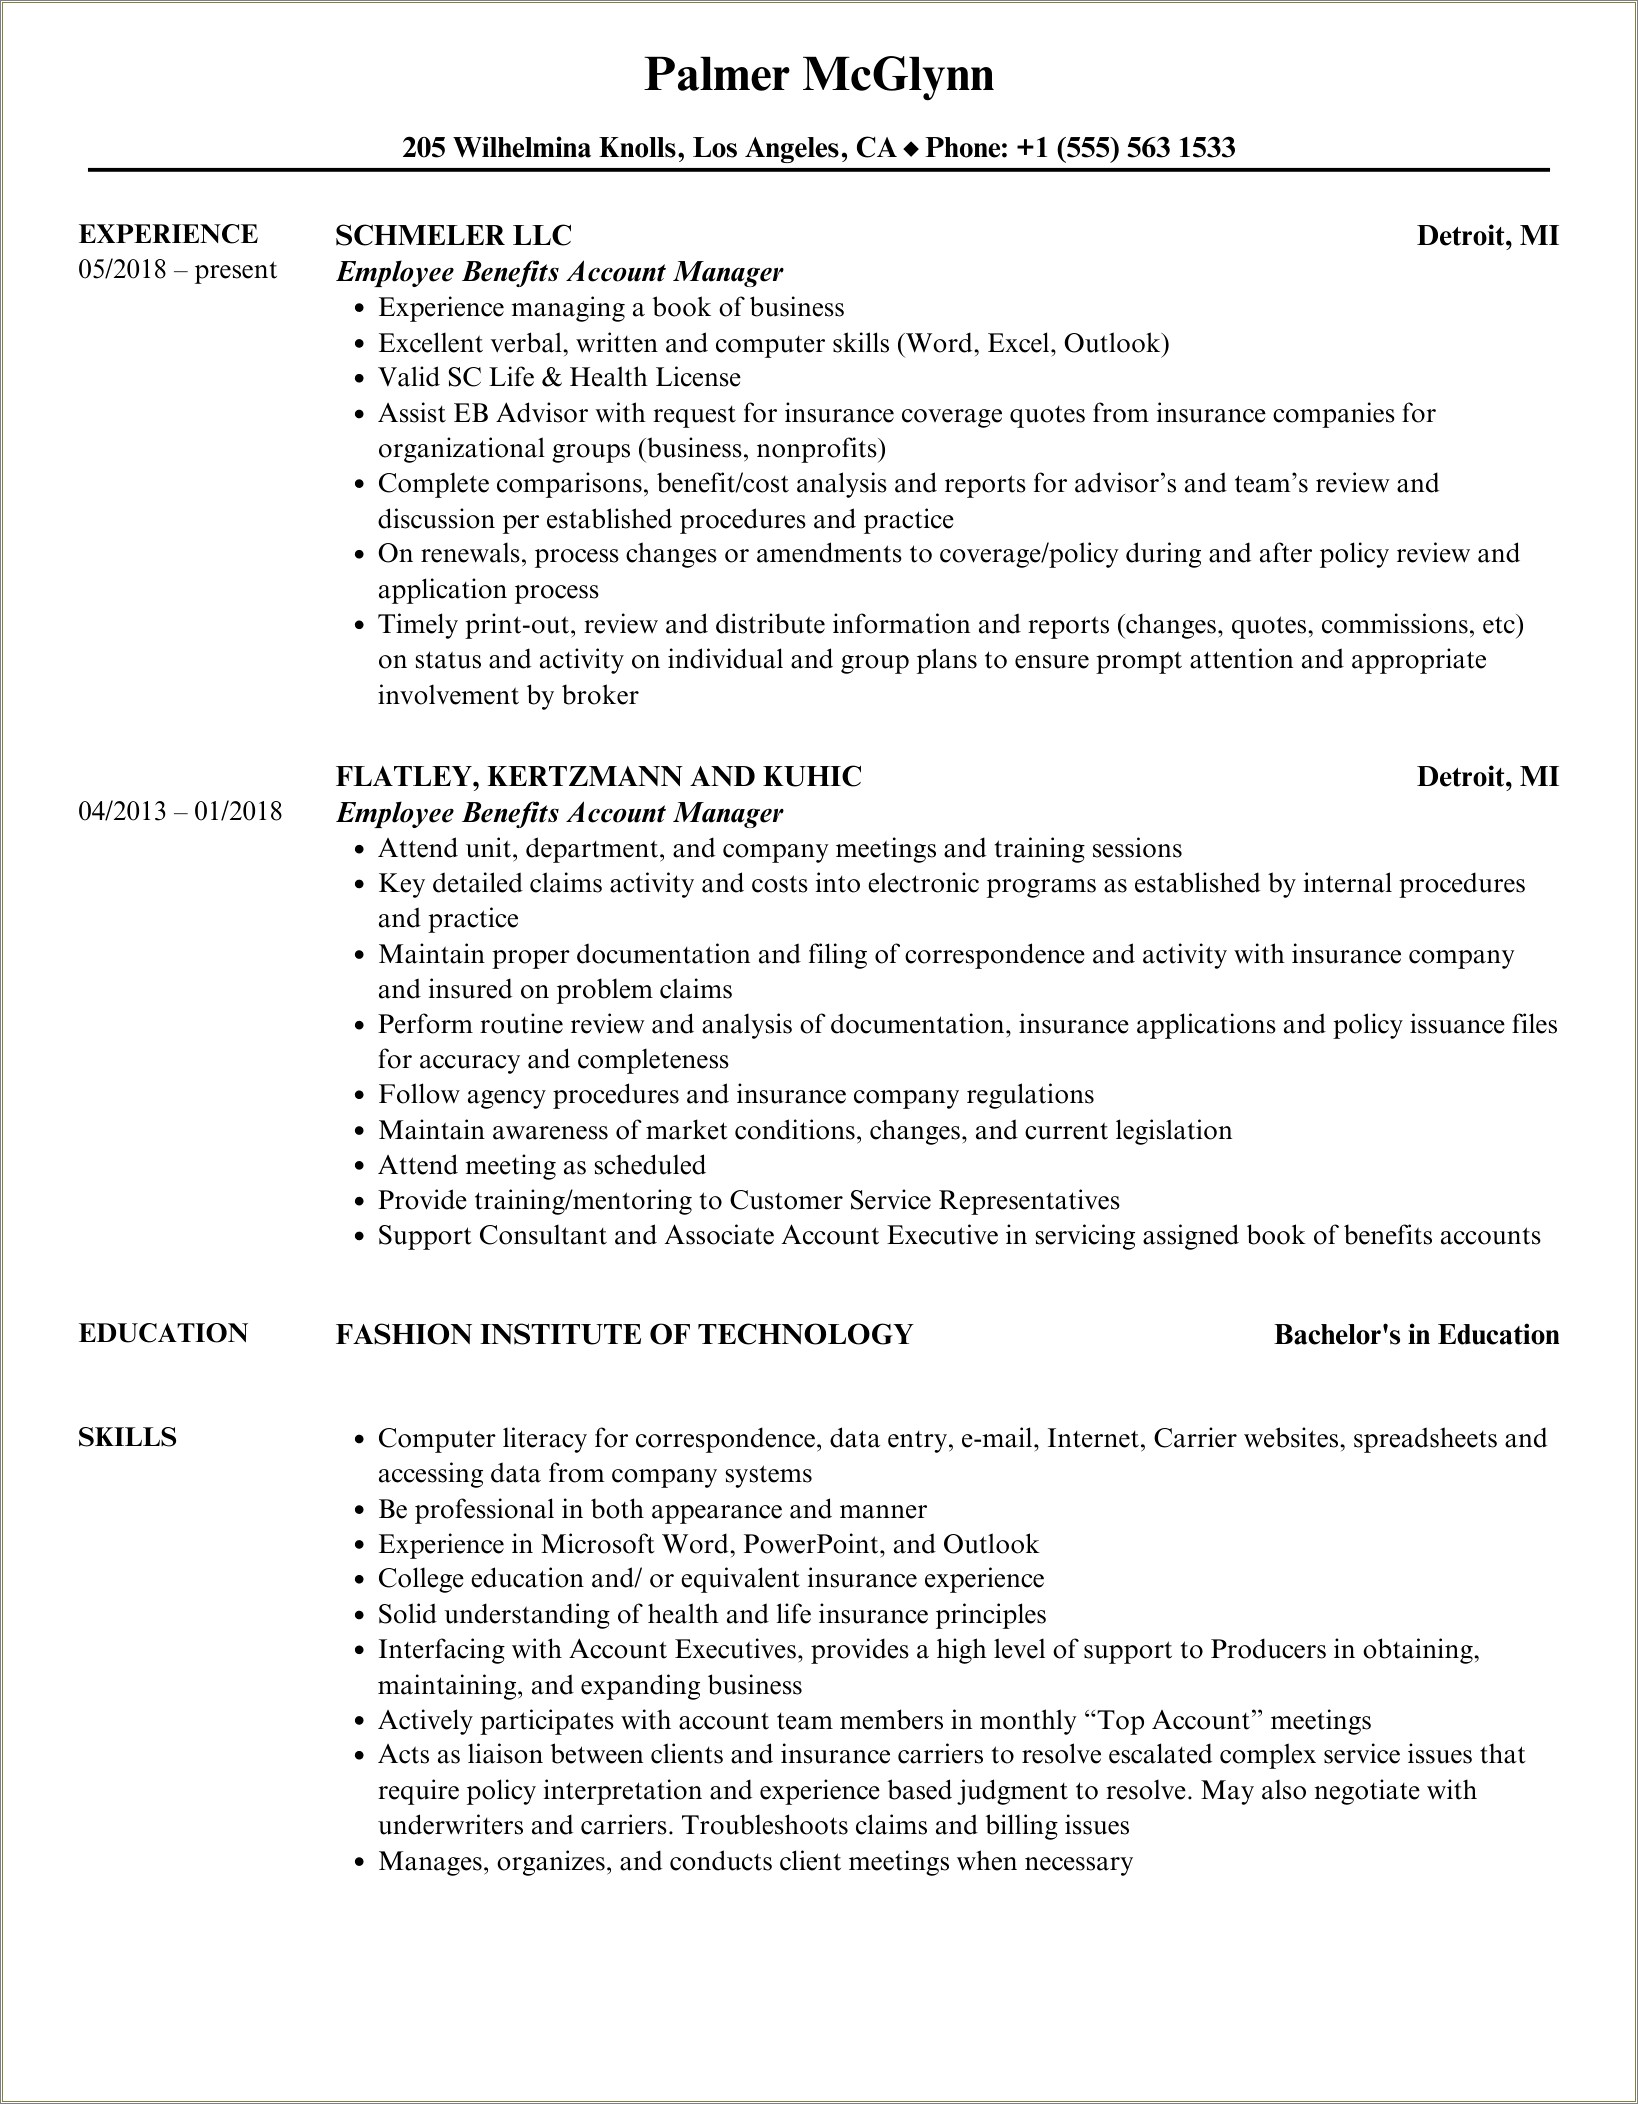 Sample Resume For Employee Benefits Account Manager